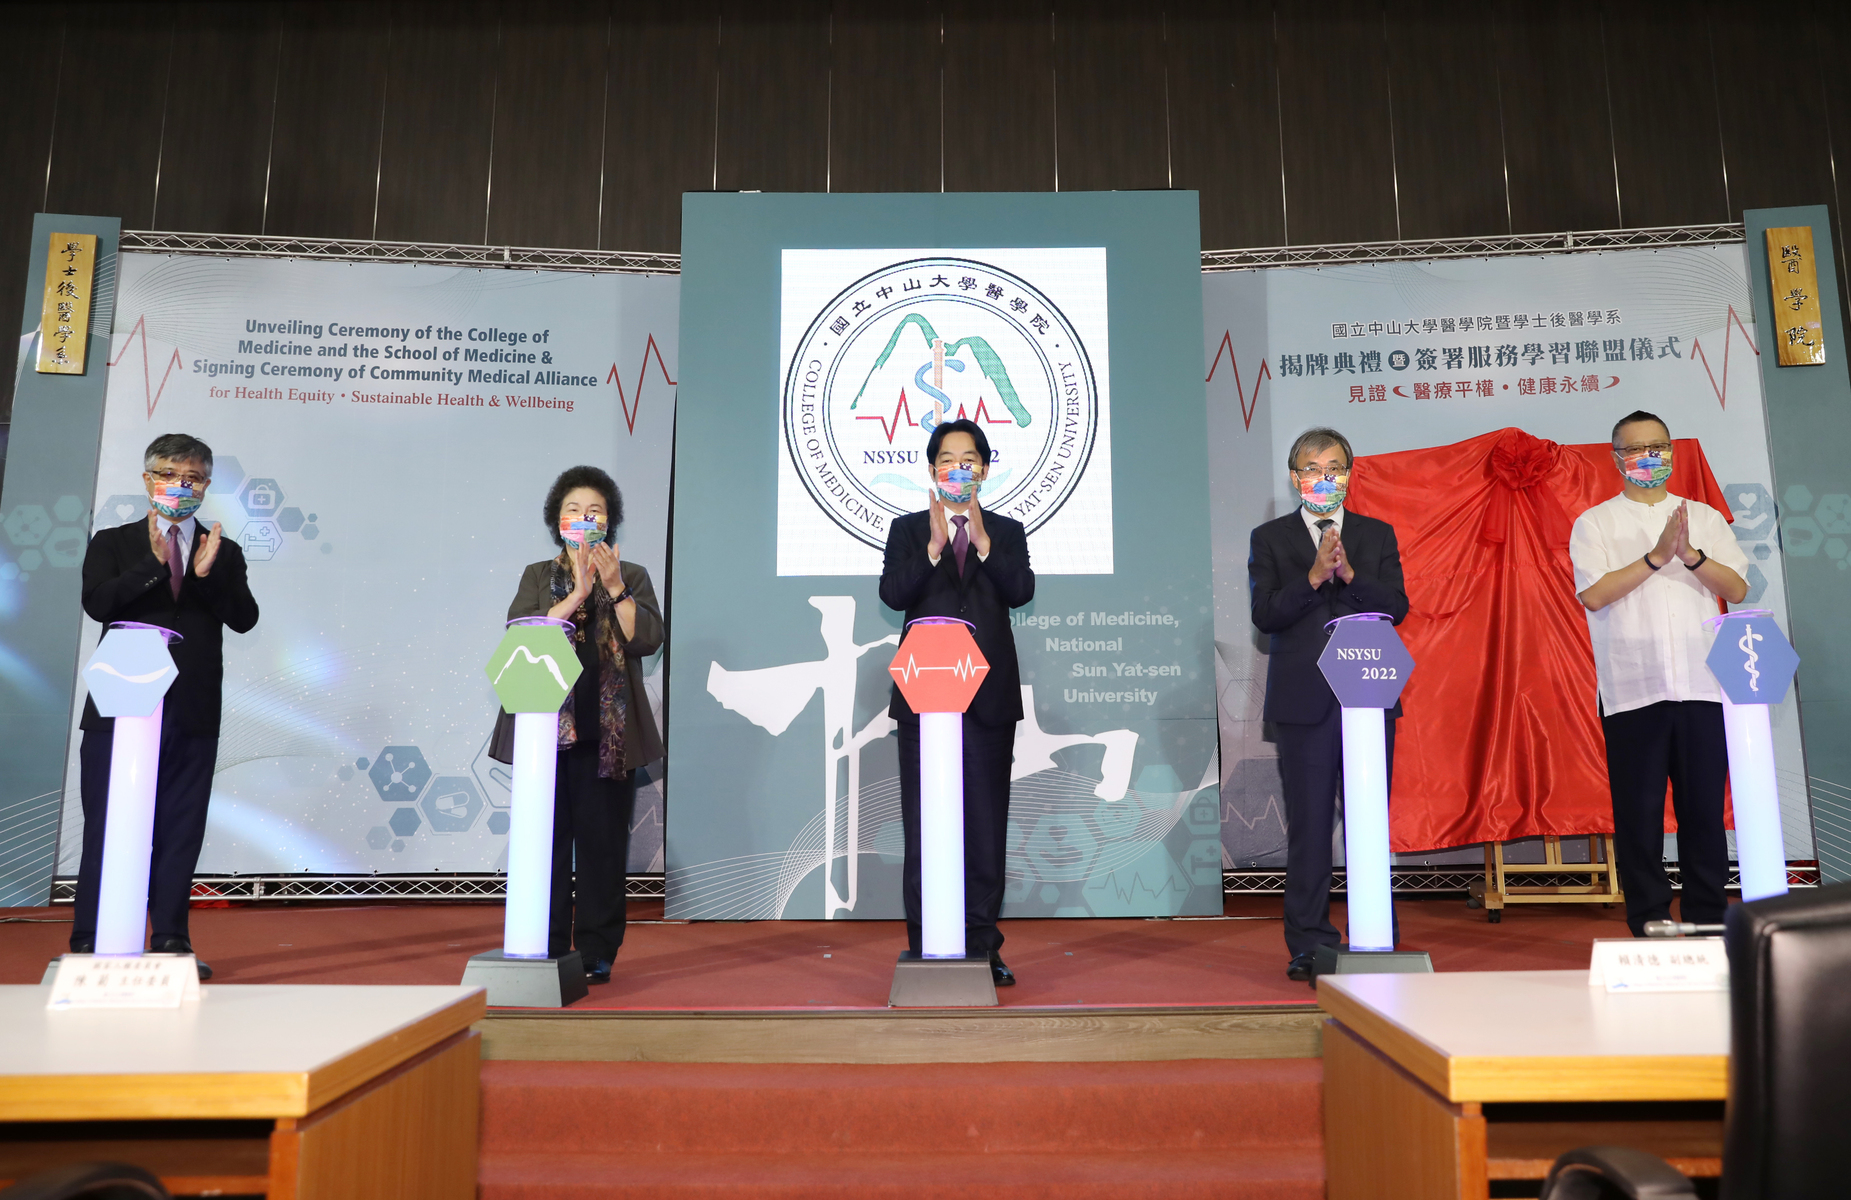 The unveiling ceremony of the NSYSU College of Medicine. From the left to the right are: Political Deputy Minister of Education Mon-Chi Lio, Chairperson of the National Human Rights Commission Chu Chen, Taiwan Vice President Lai Ching-te, NSYSU President Ying-Yao Cheng and the chairperson of Ba Ba Business Chung-Hui Huang.